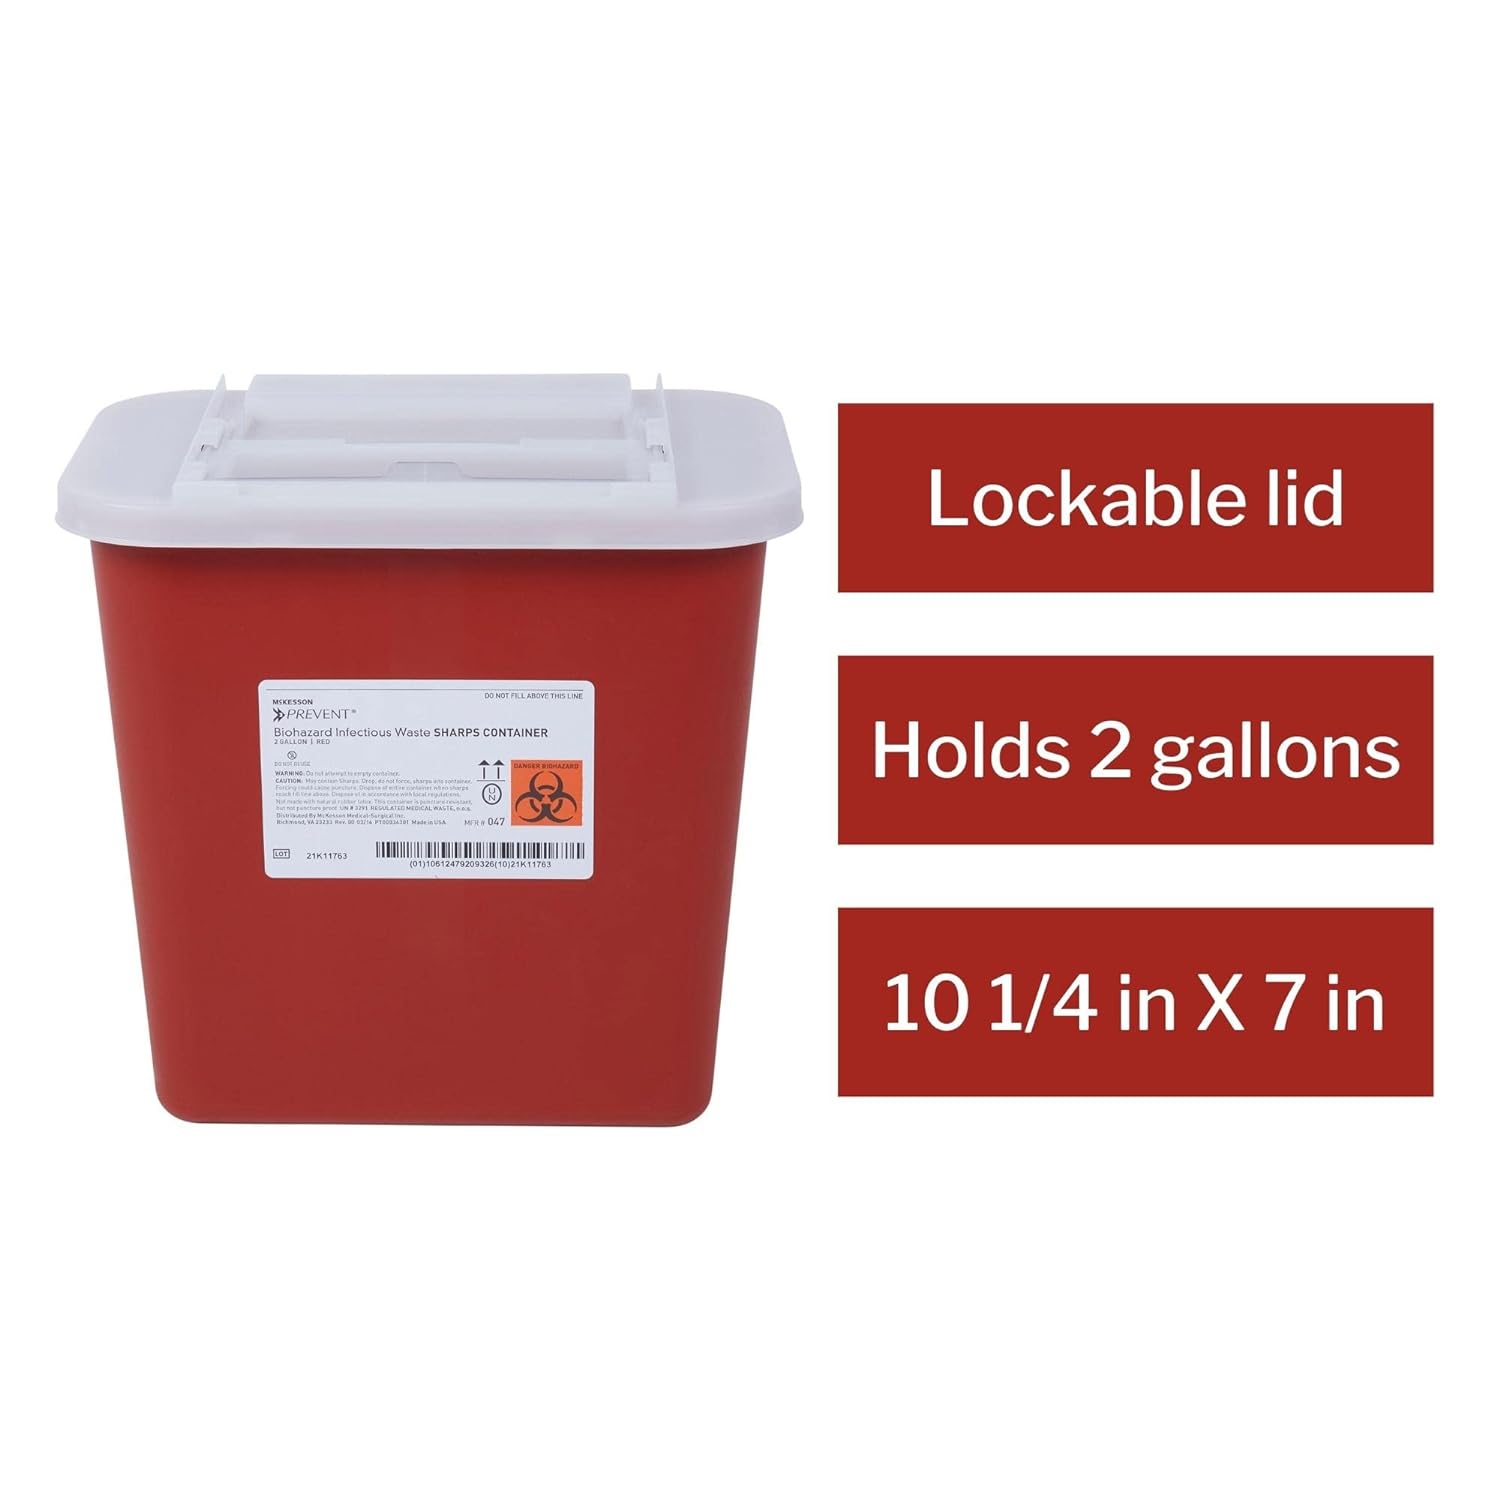 McKesson Prevent Biohazard Infectious Waste Sharps Container - Plastic, Horizontal Entry, Translucent Sliding Lid - Red, 2 gal, 7 in x 10 1/2 in x 10 1/4 in, 1 Count